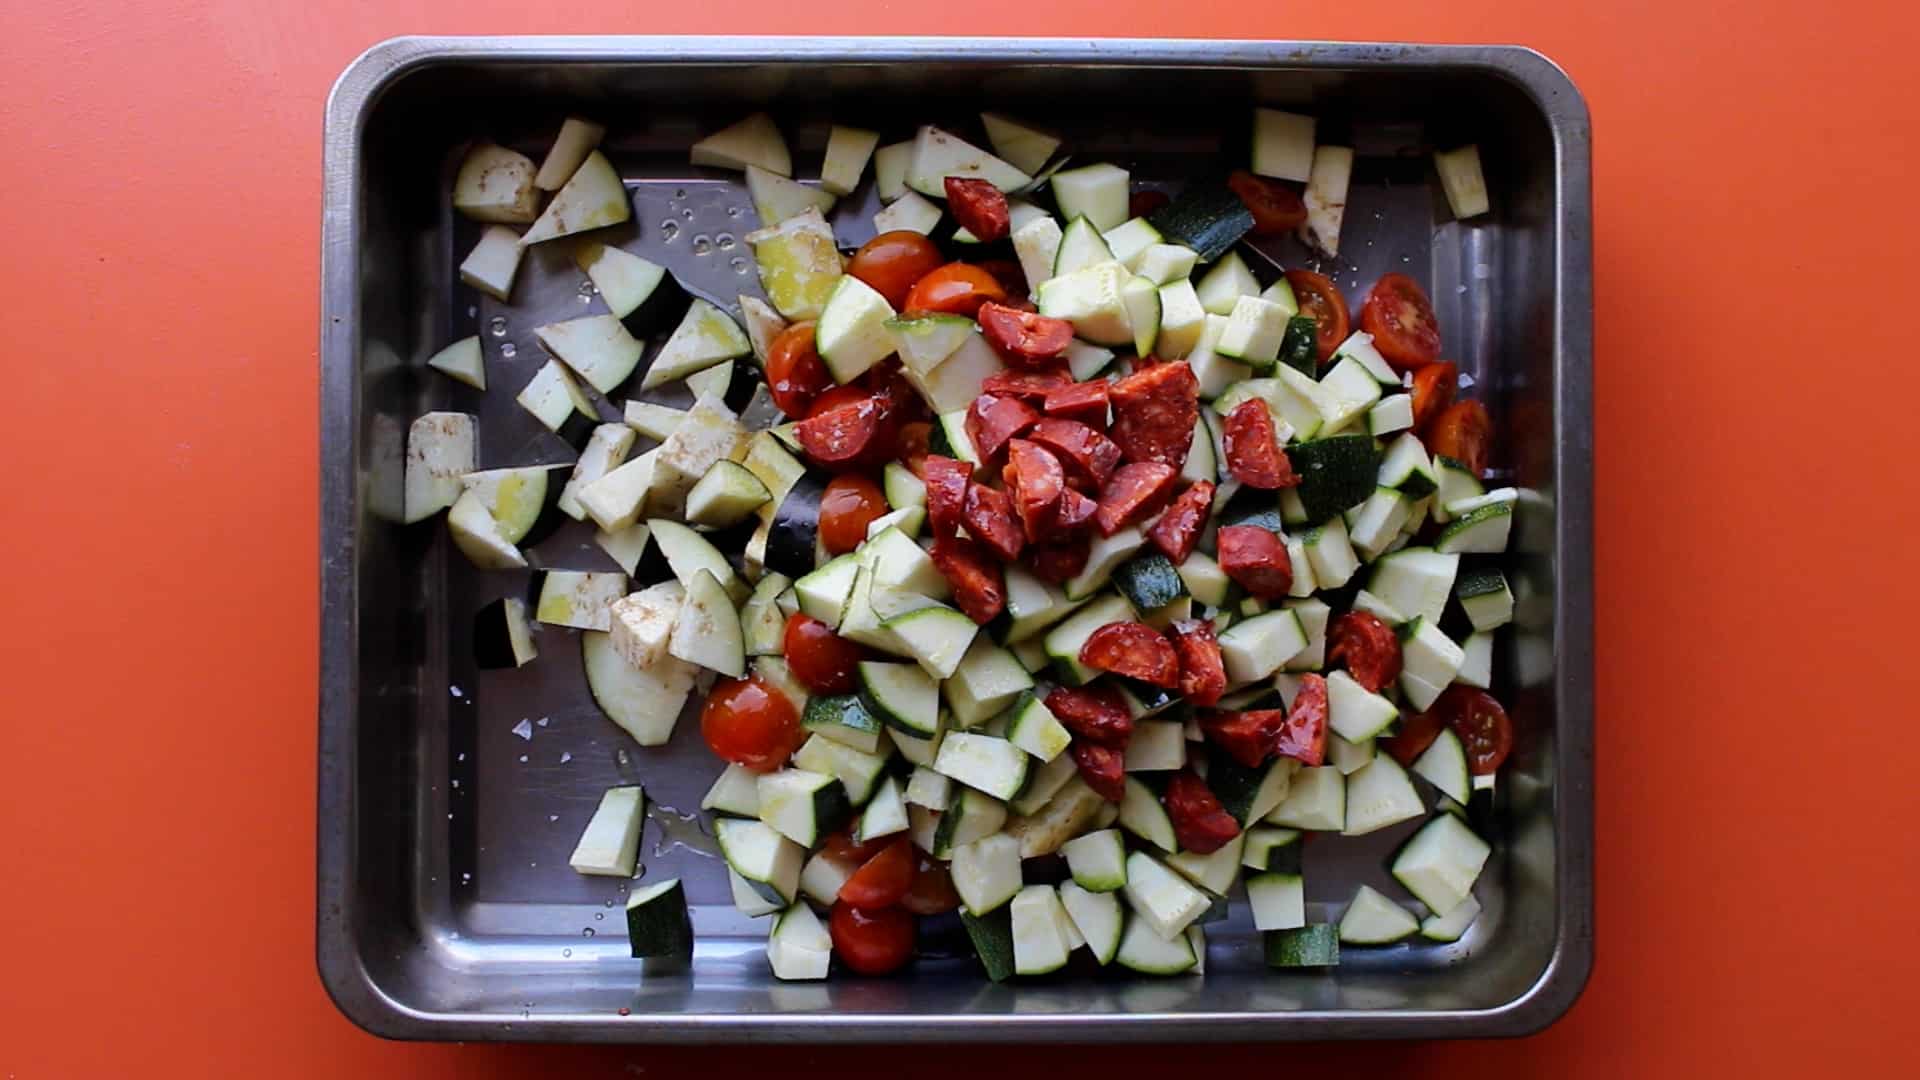 Chopped courgettes, tomatoes and sliced chorizo on a stainless steel baking tray on an orange background.